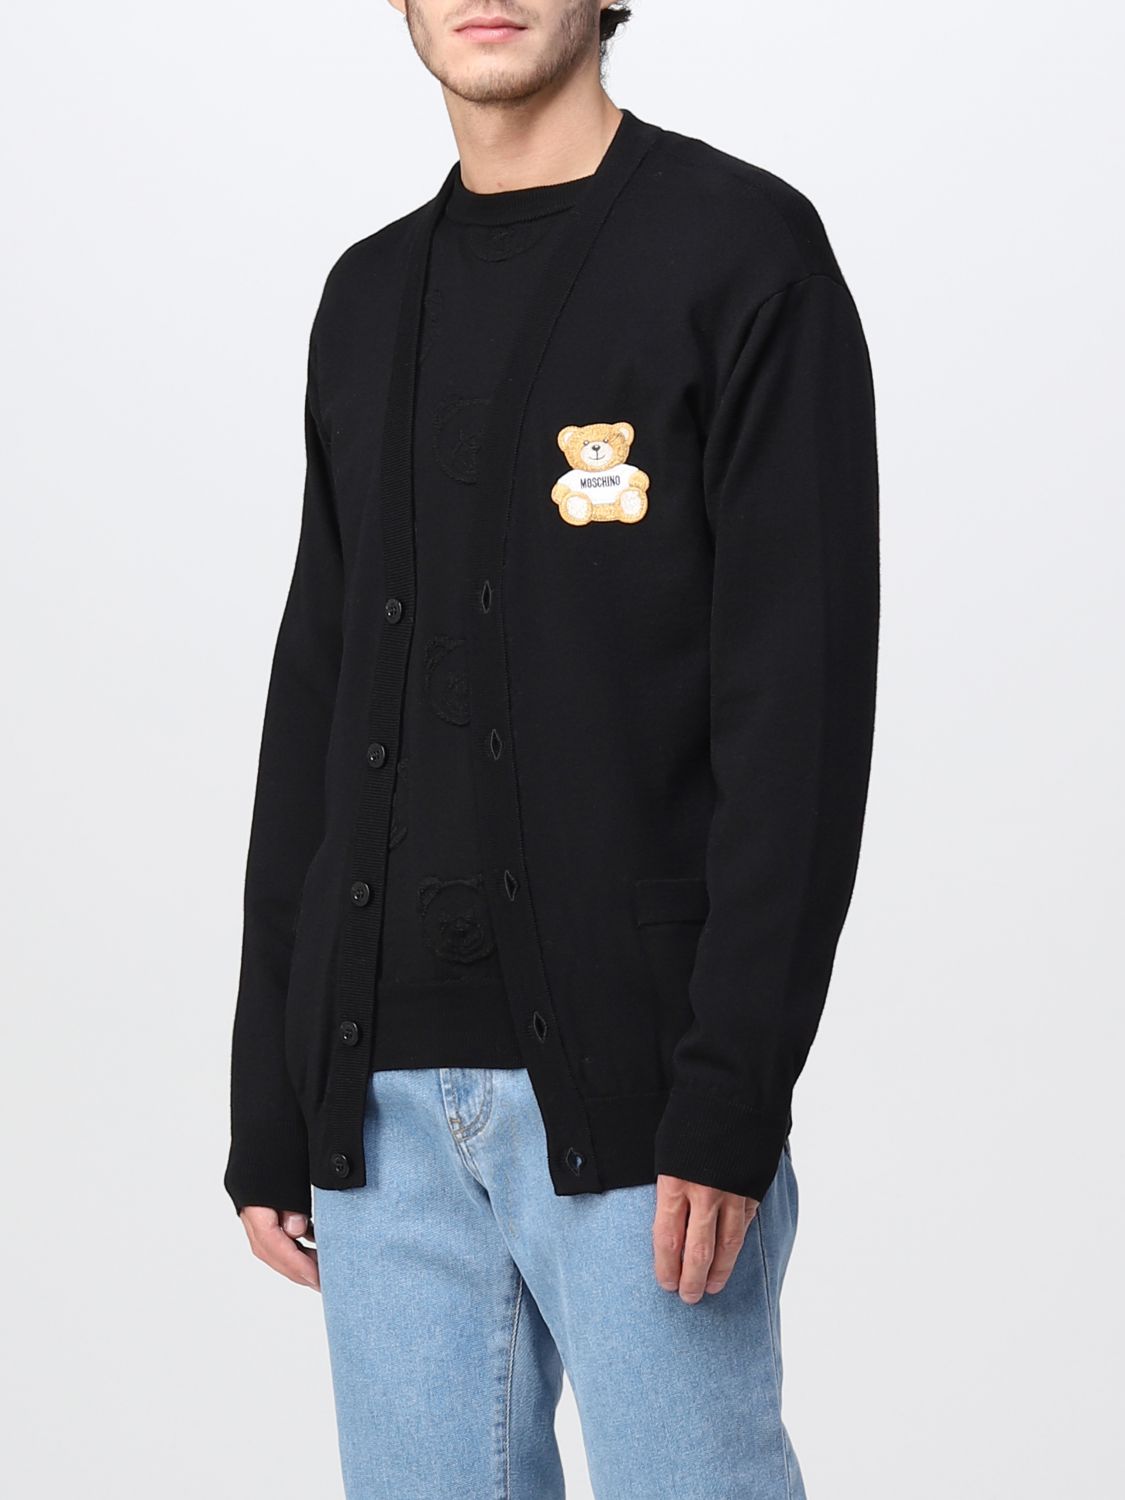 MOSCHINO COUTURE: jumper for men - Black | Moschino Couture jumper ...